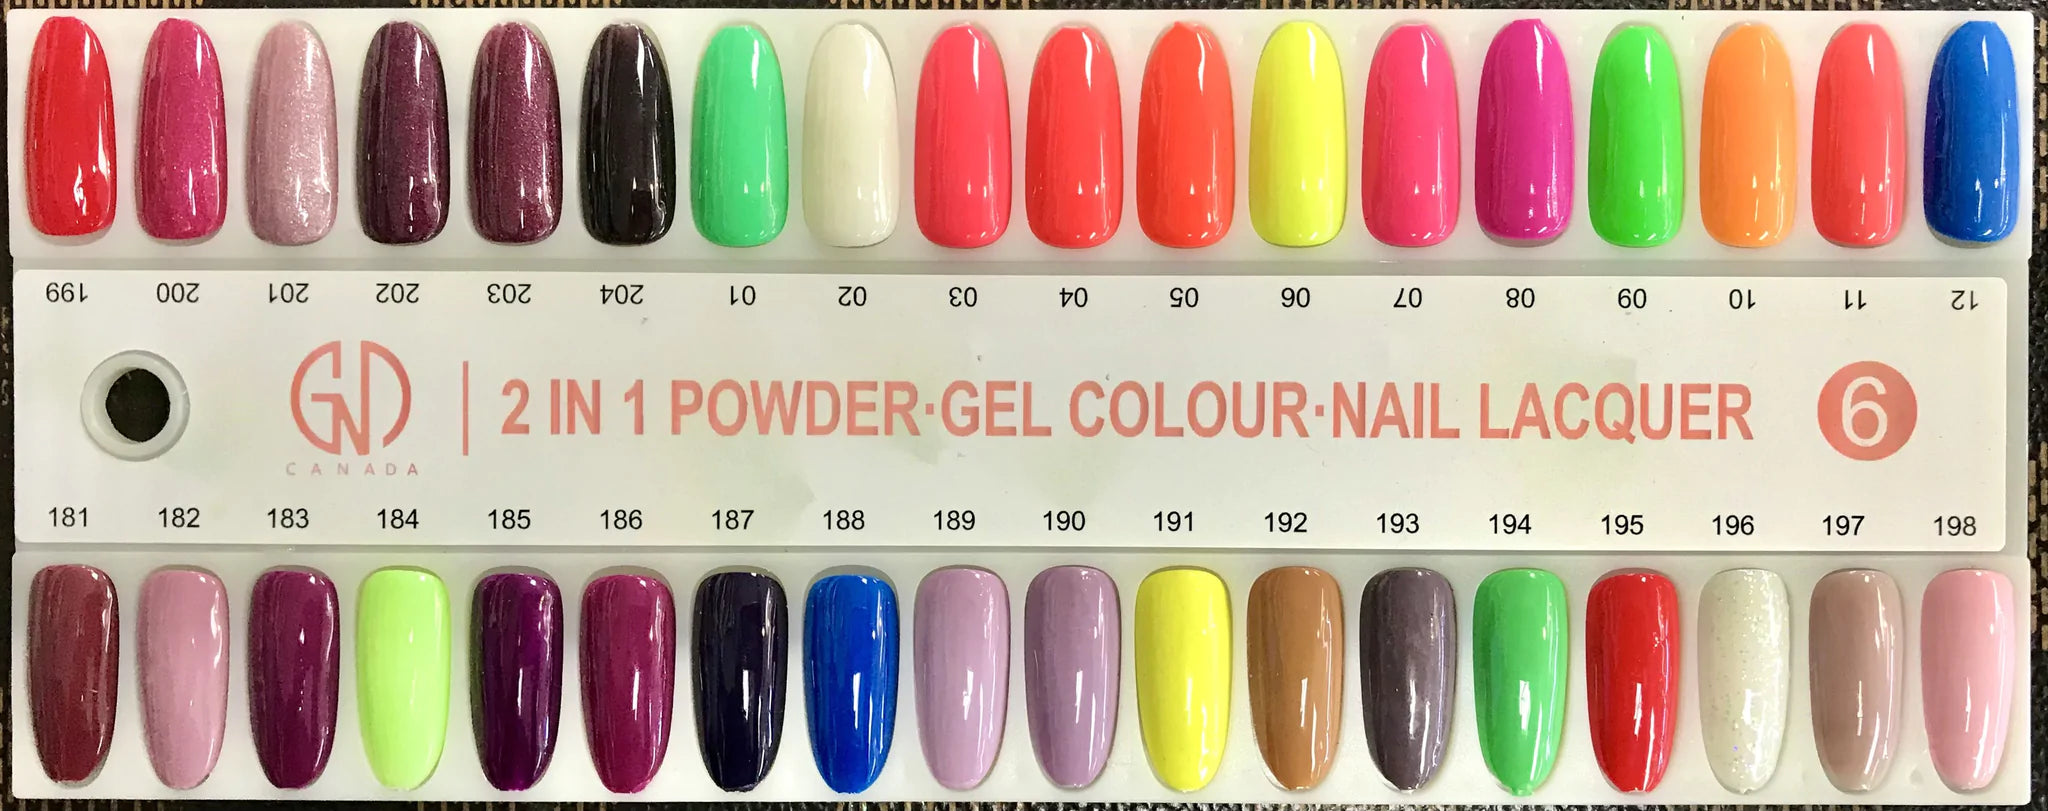 GND Duo Gel & Lacquer 202